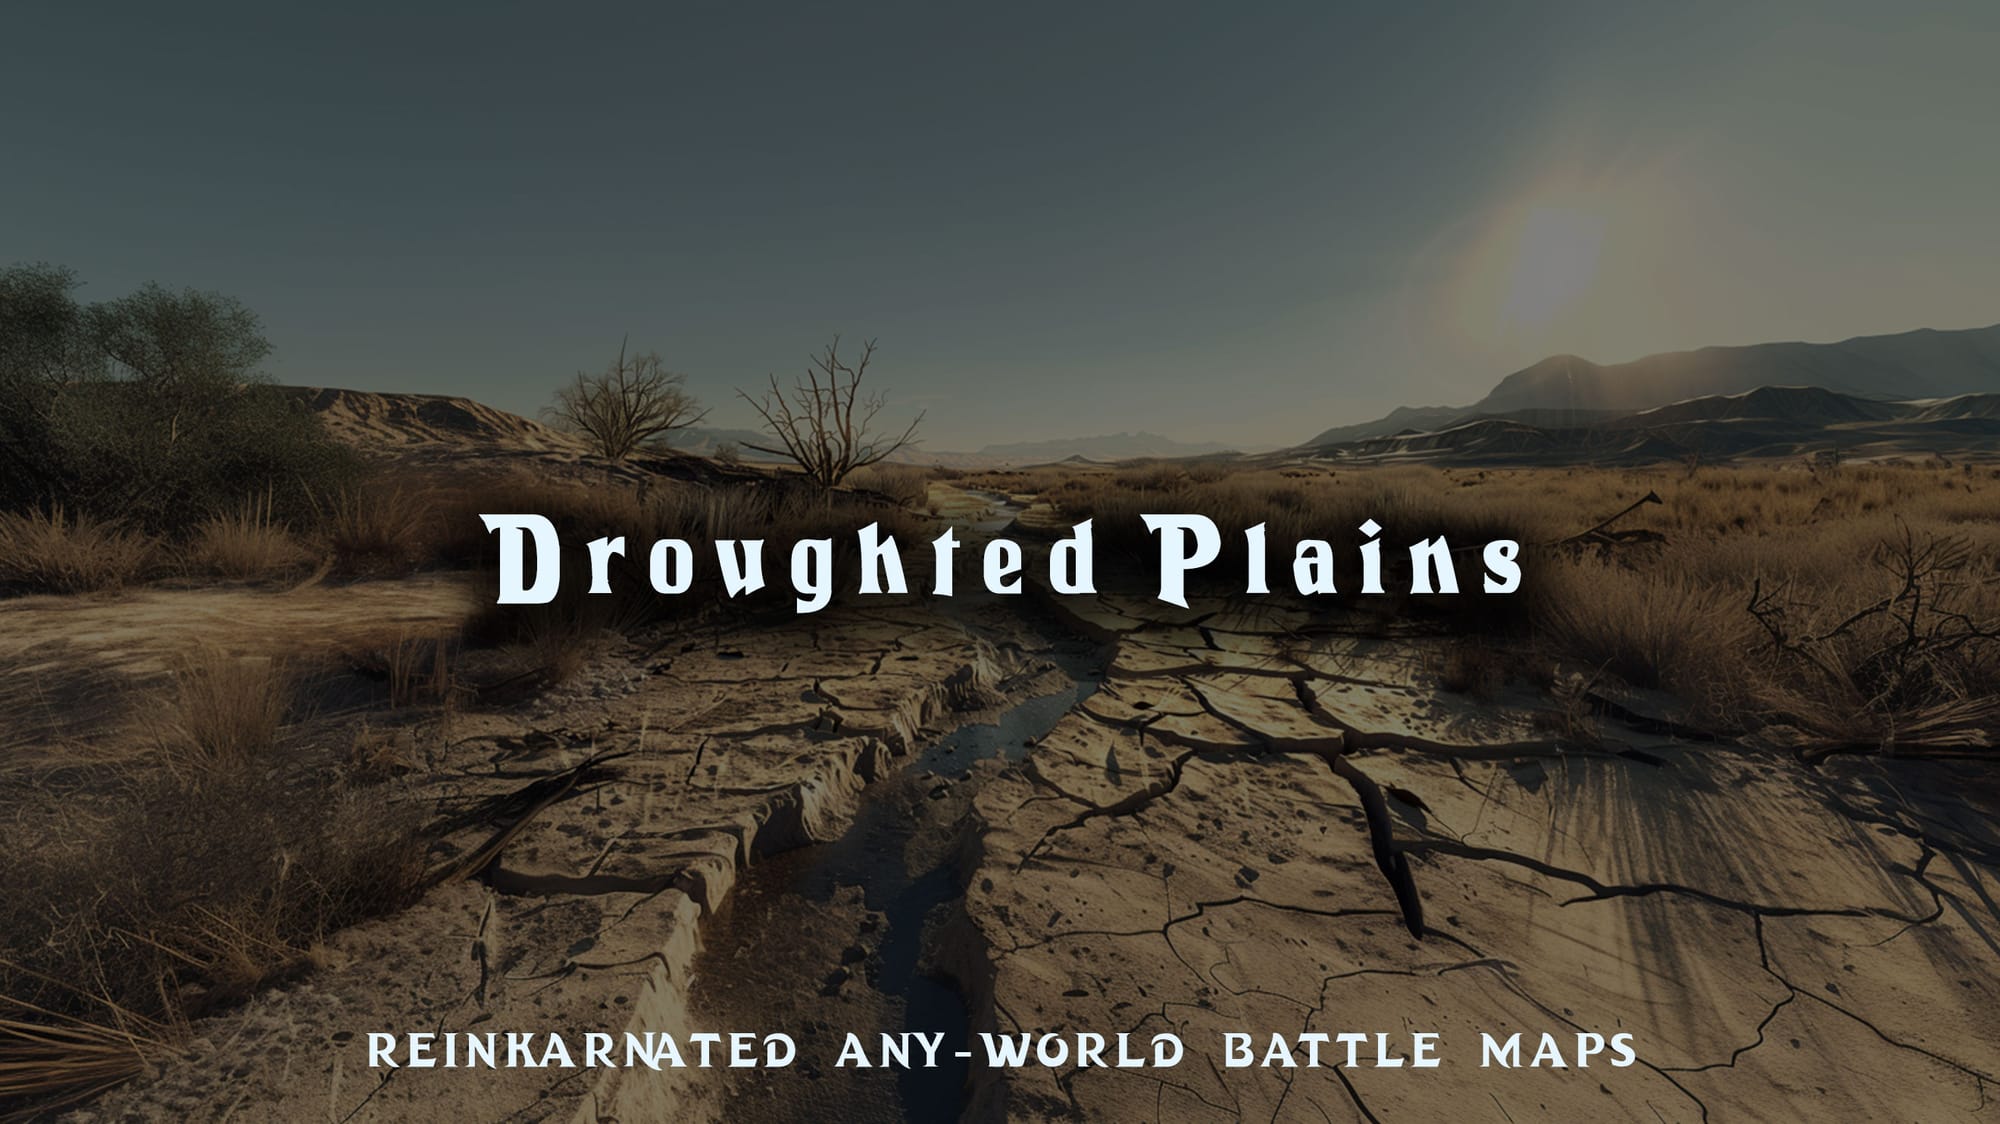 Droughted Plains